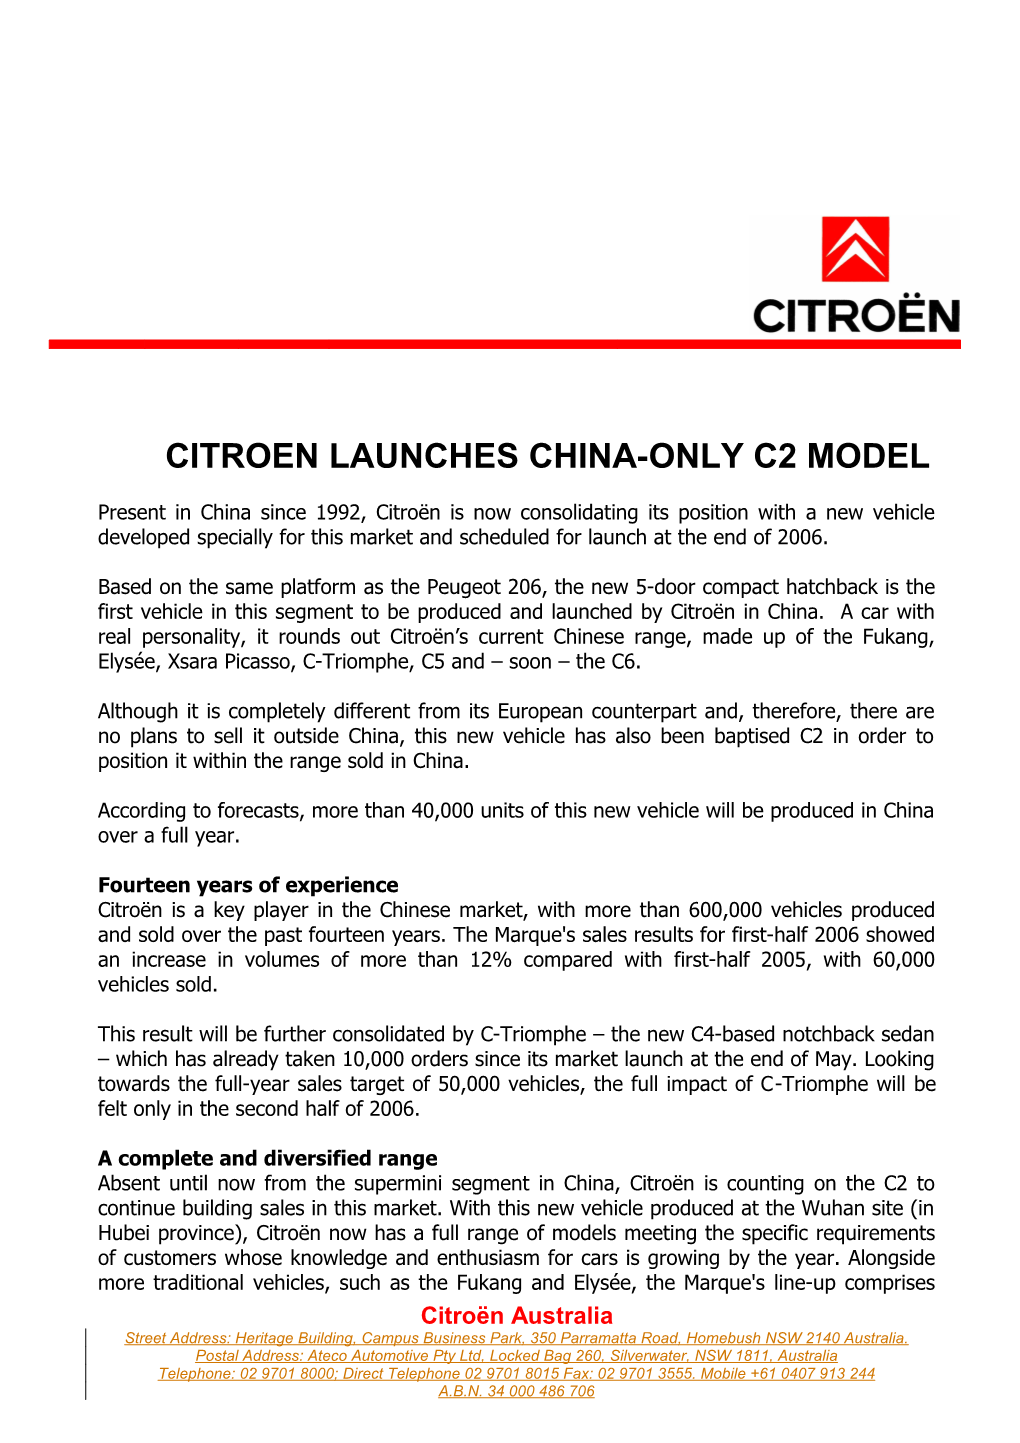 Citroen Launches China-Only C2 Model